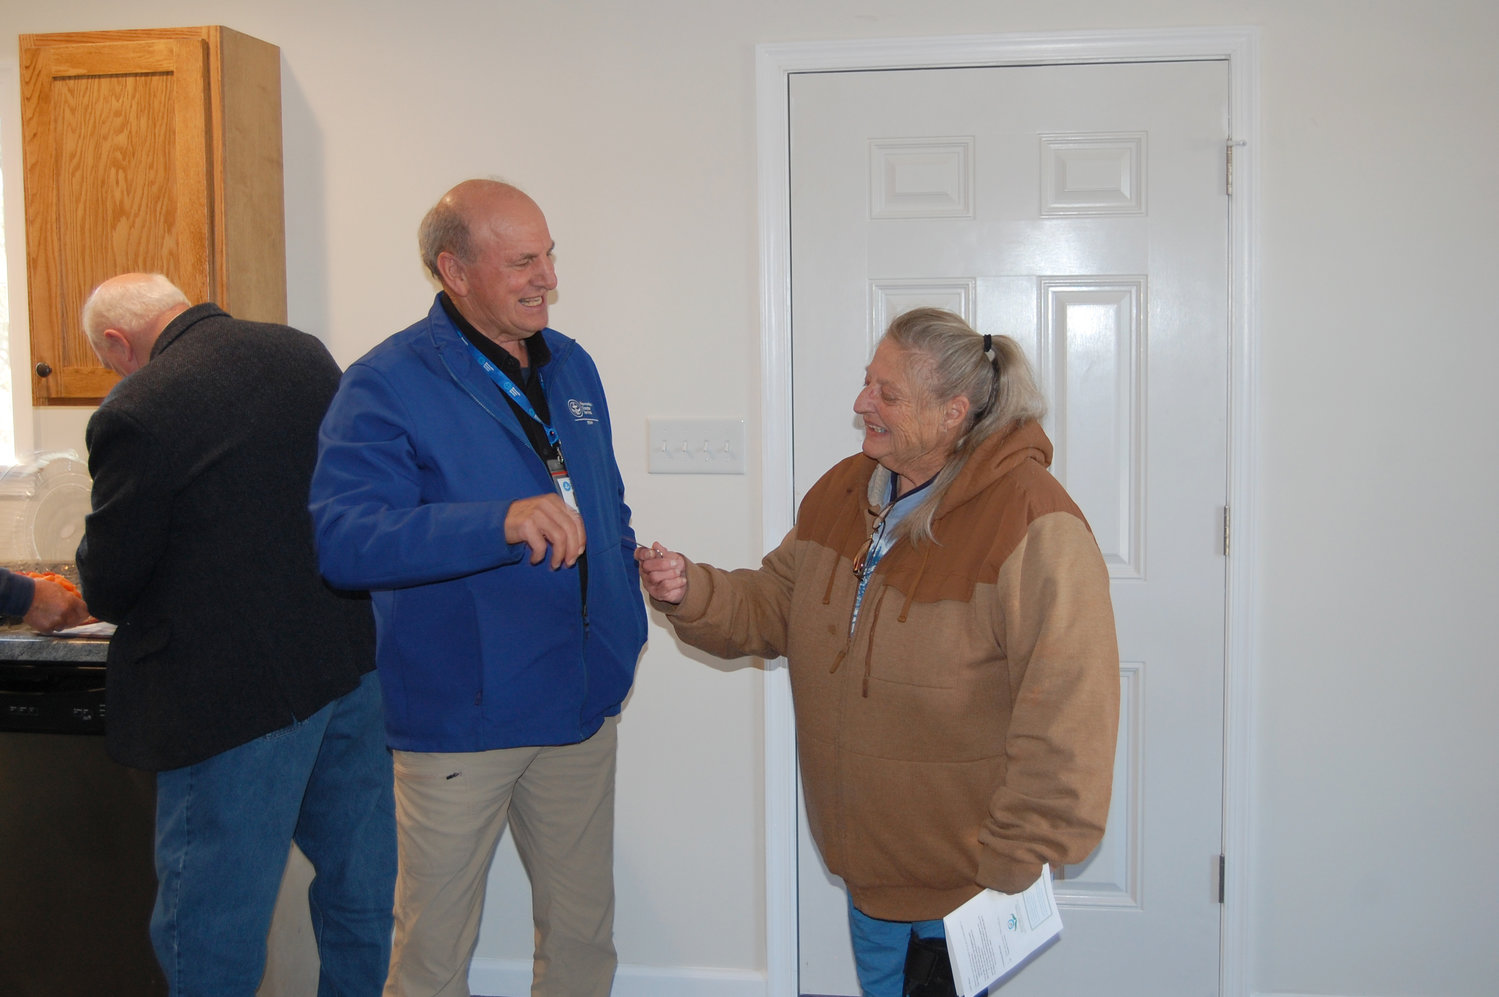 Myrtle Haugh receives the keys to her new home from Larry Stoner of MDS following the dedication ceremony.